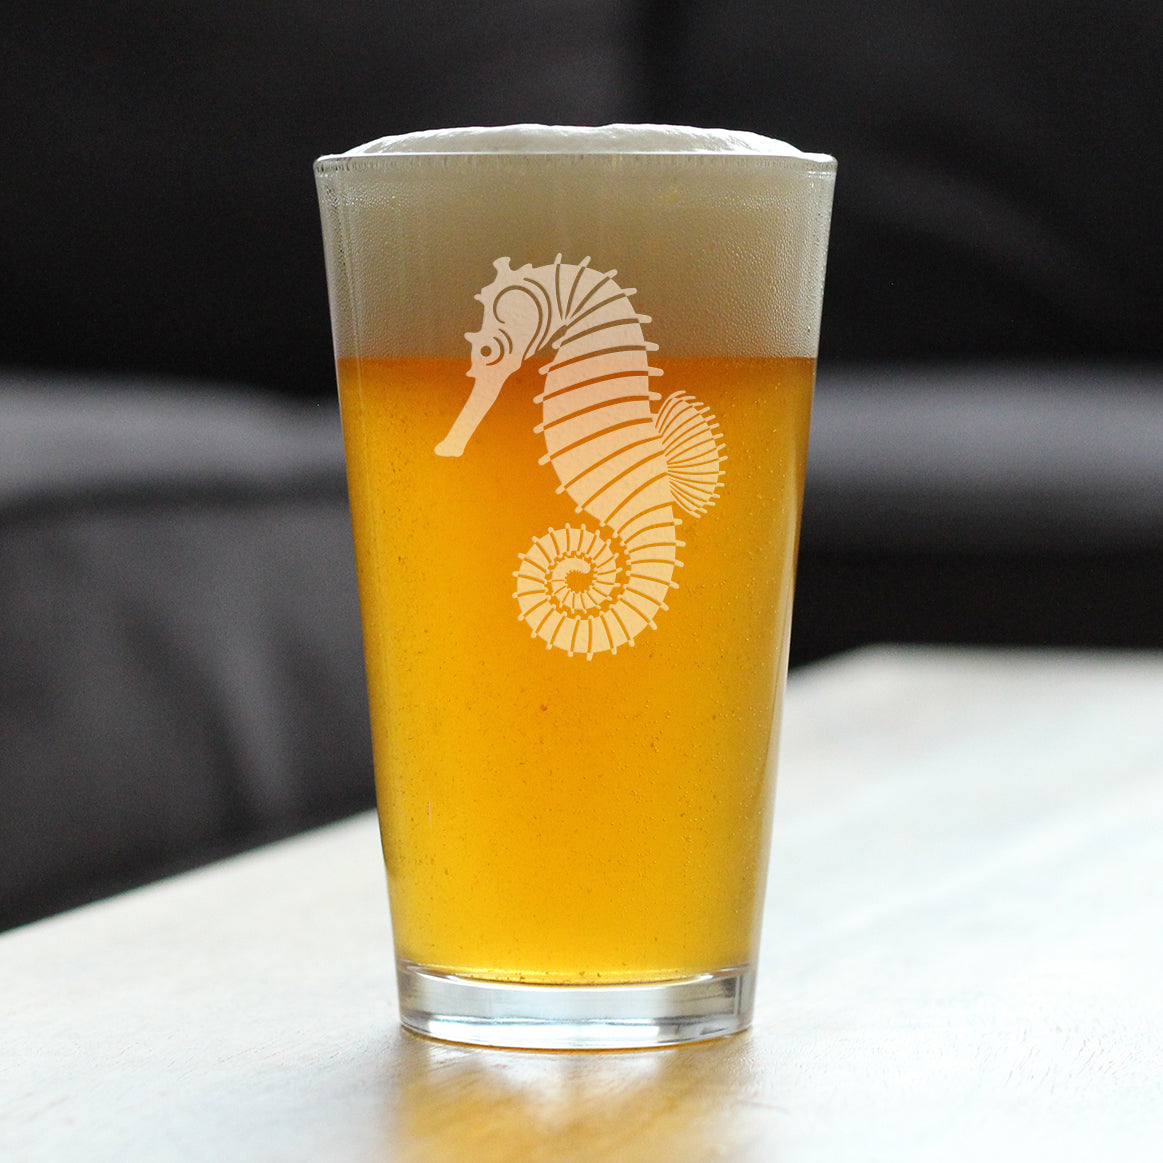 Seahorse Pint Glass for Beer - Unique Beachy Summer Gifts and Beach House Decor - 16 Oz Glasses